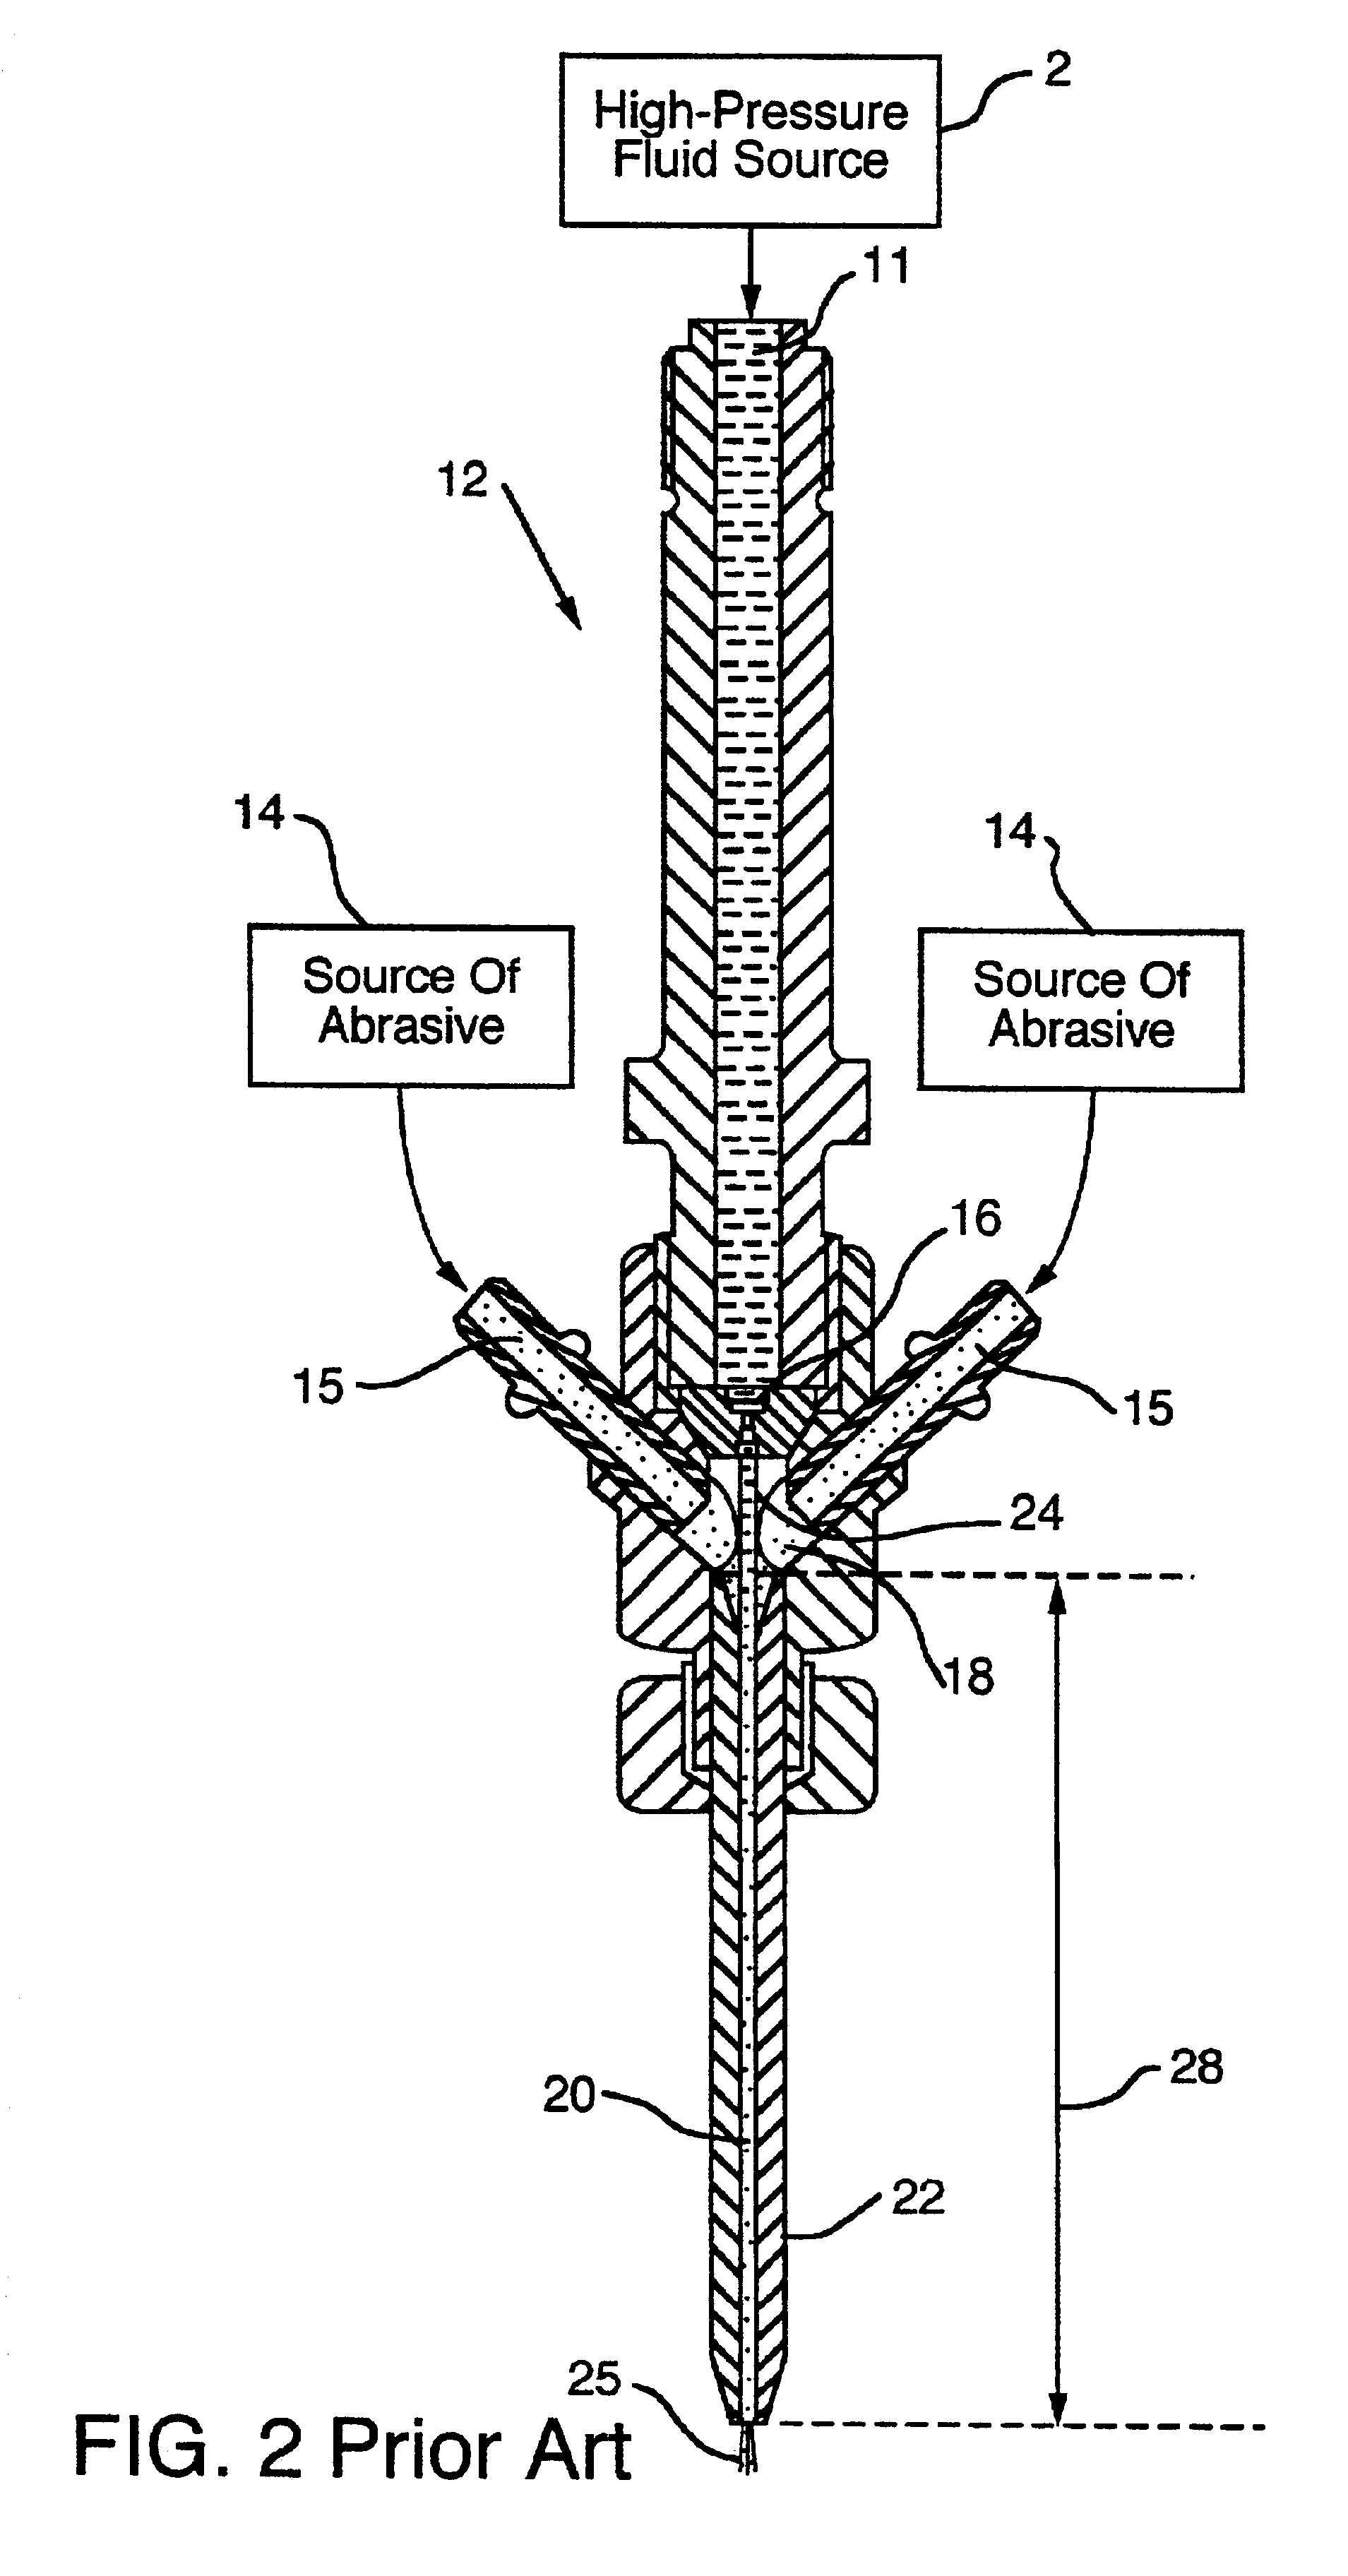 Method of making an abrasive water jet with superhard materials